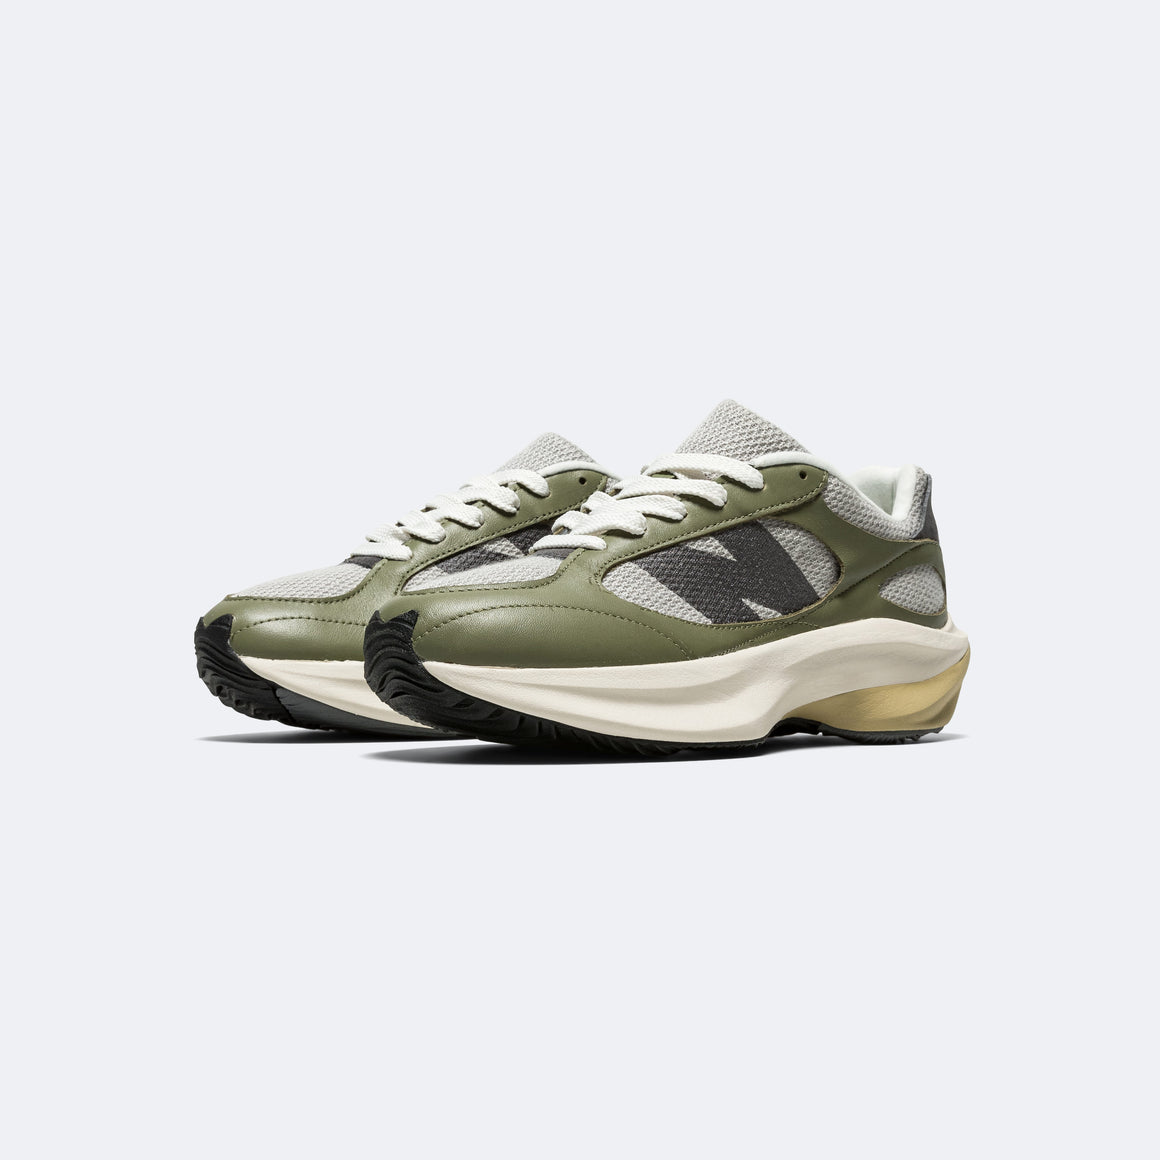 New Balance - WRPD RUNNER 'Leather Pack' - Olive - UP THERE